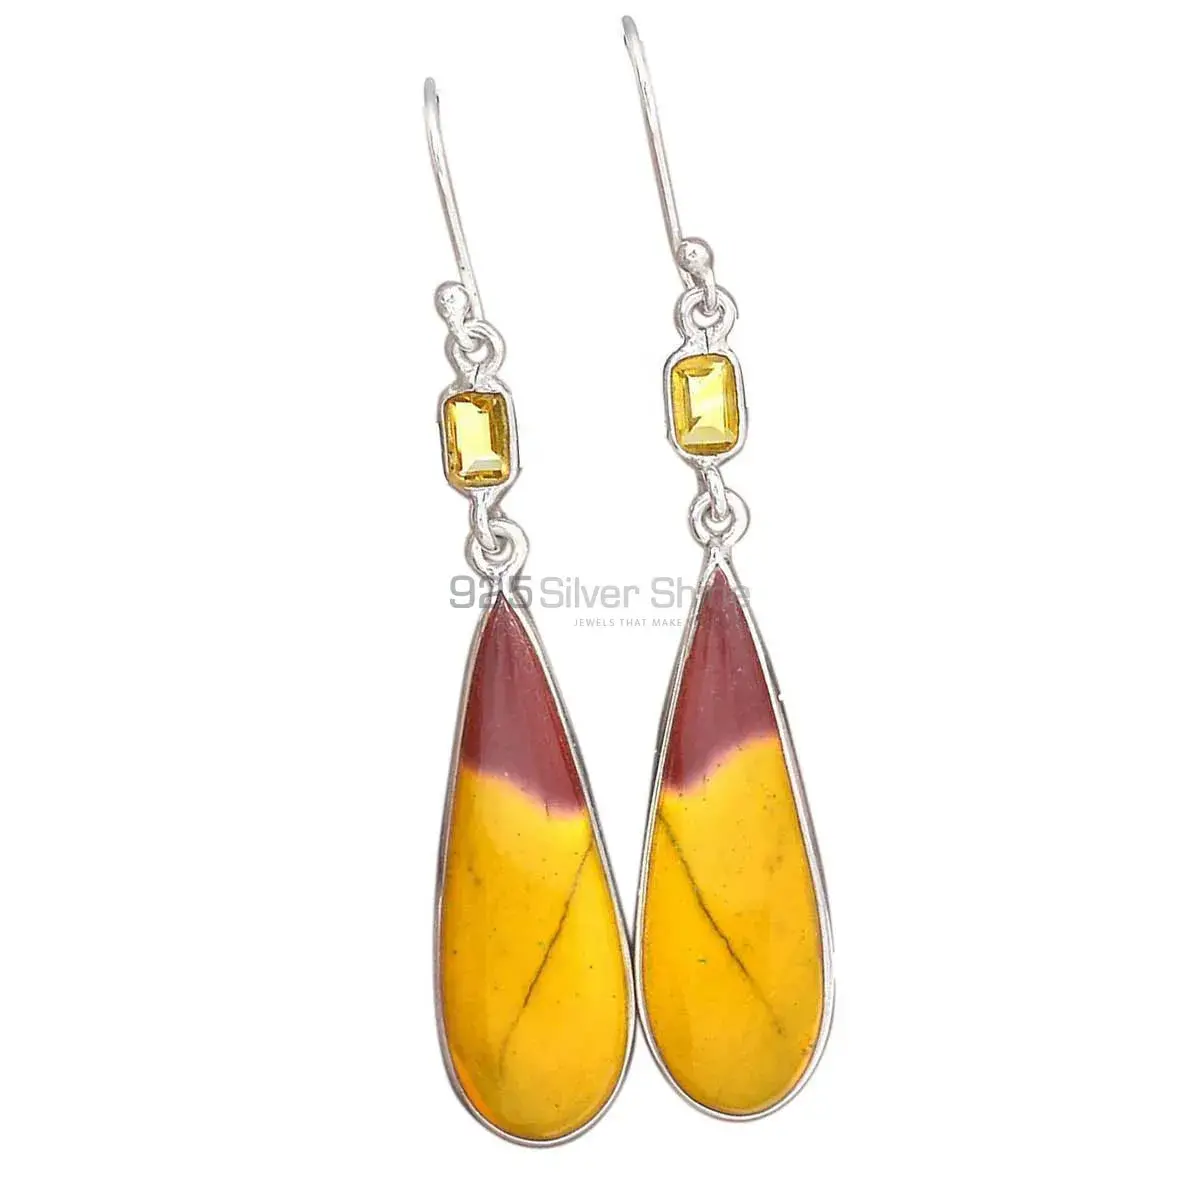 Natural Mookaite, Citrine Gemstone Earrings Manufacturer In 925 Sterling Silver Jewelry 925SE2736